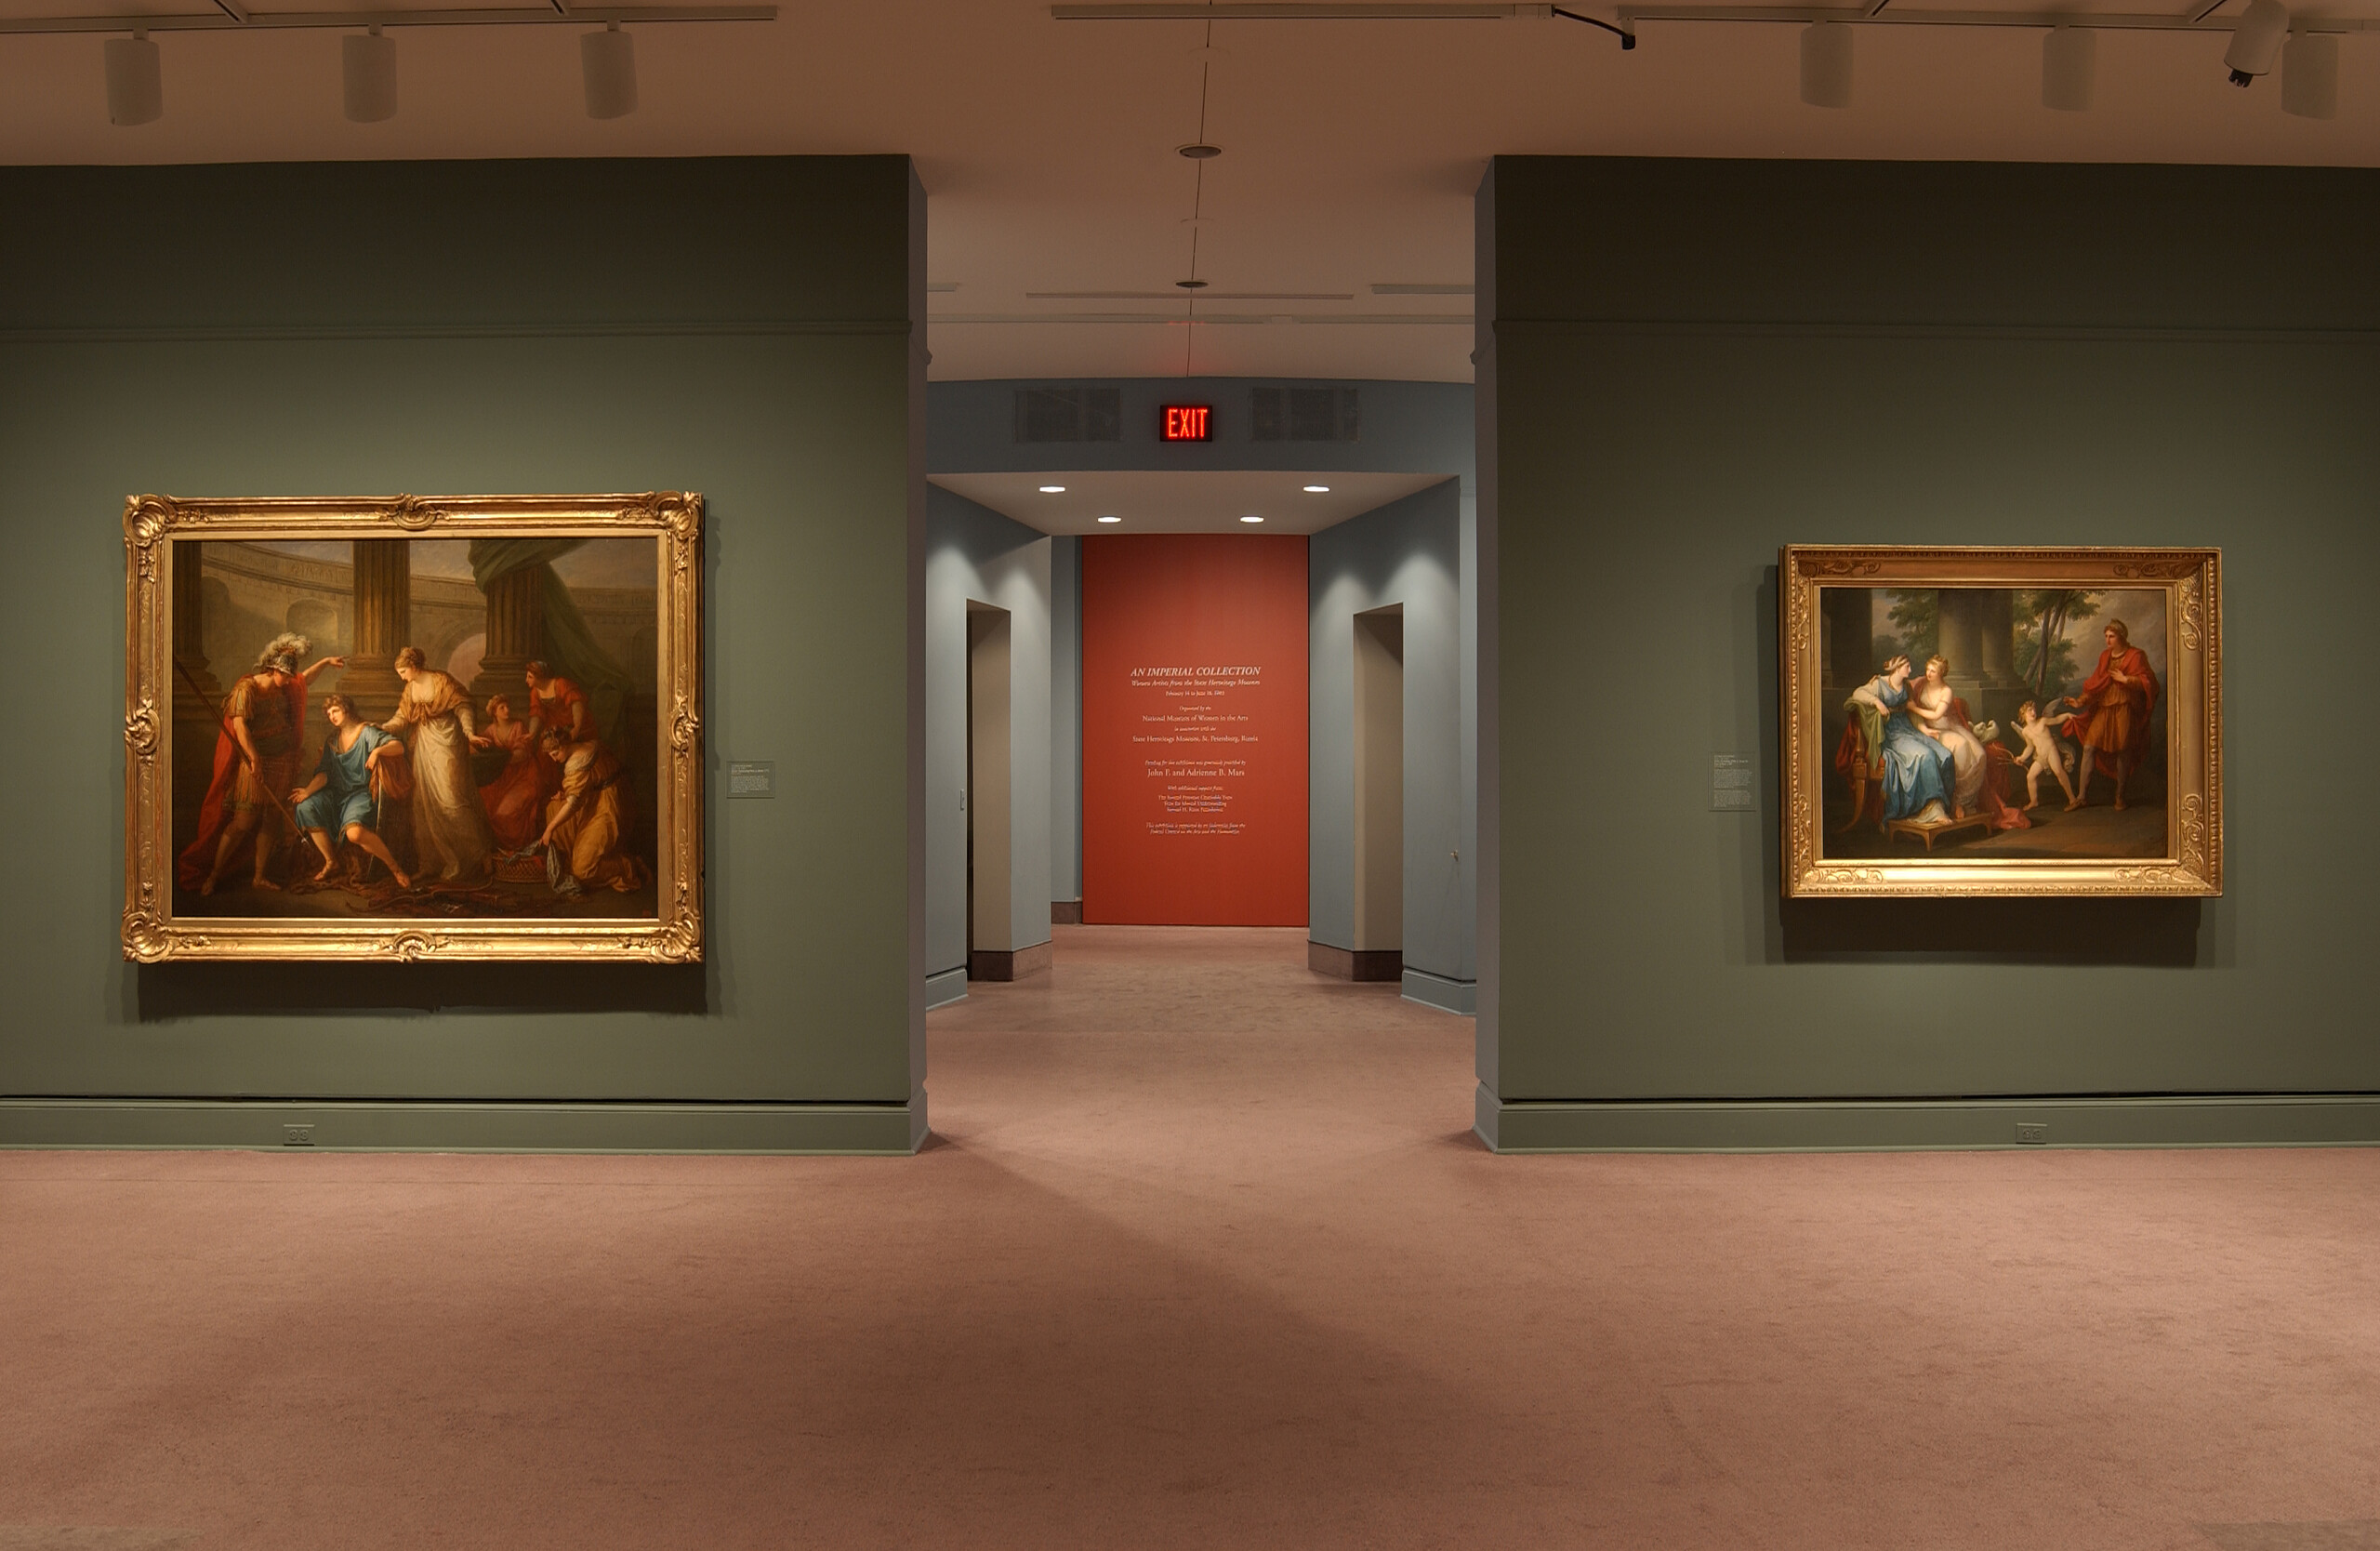 Installation image of an exhibition. Two large oil paintings hang on opposite walls. The walls are painted in sage green. The paintings are framed in golden frames and portray mythical scenes.